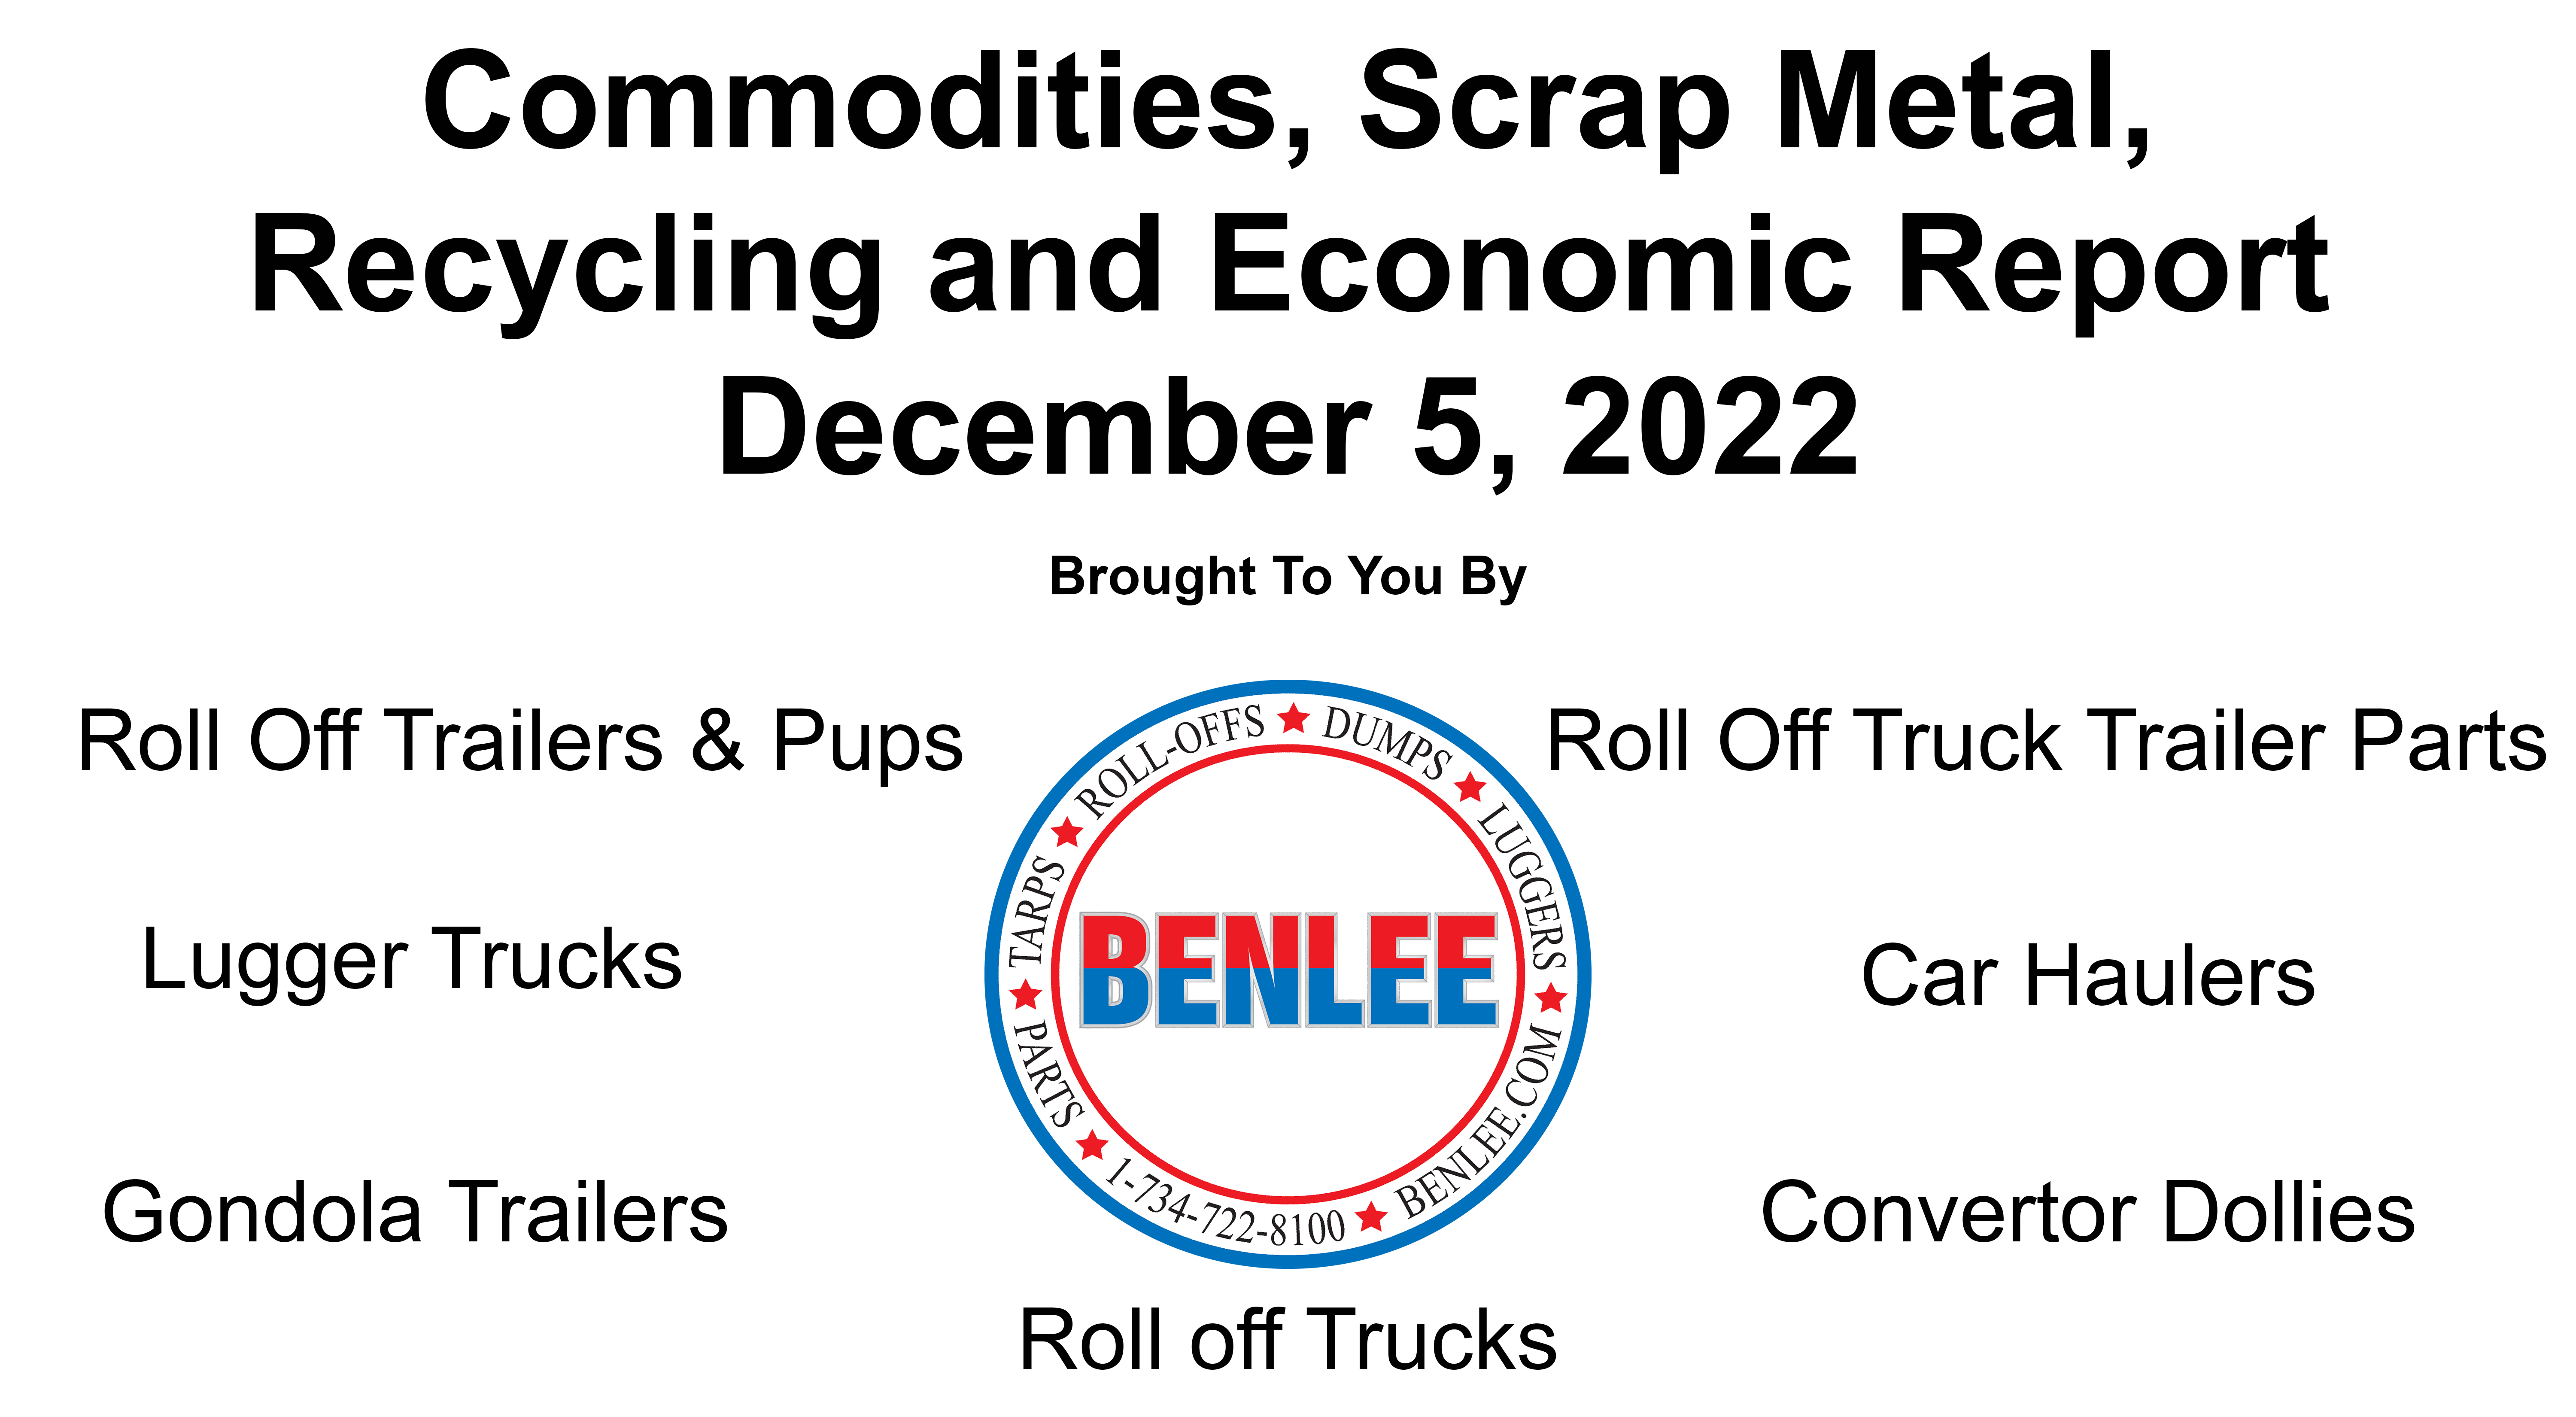 Commodities, Scrap Metal, Recycling and Economic Report